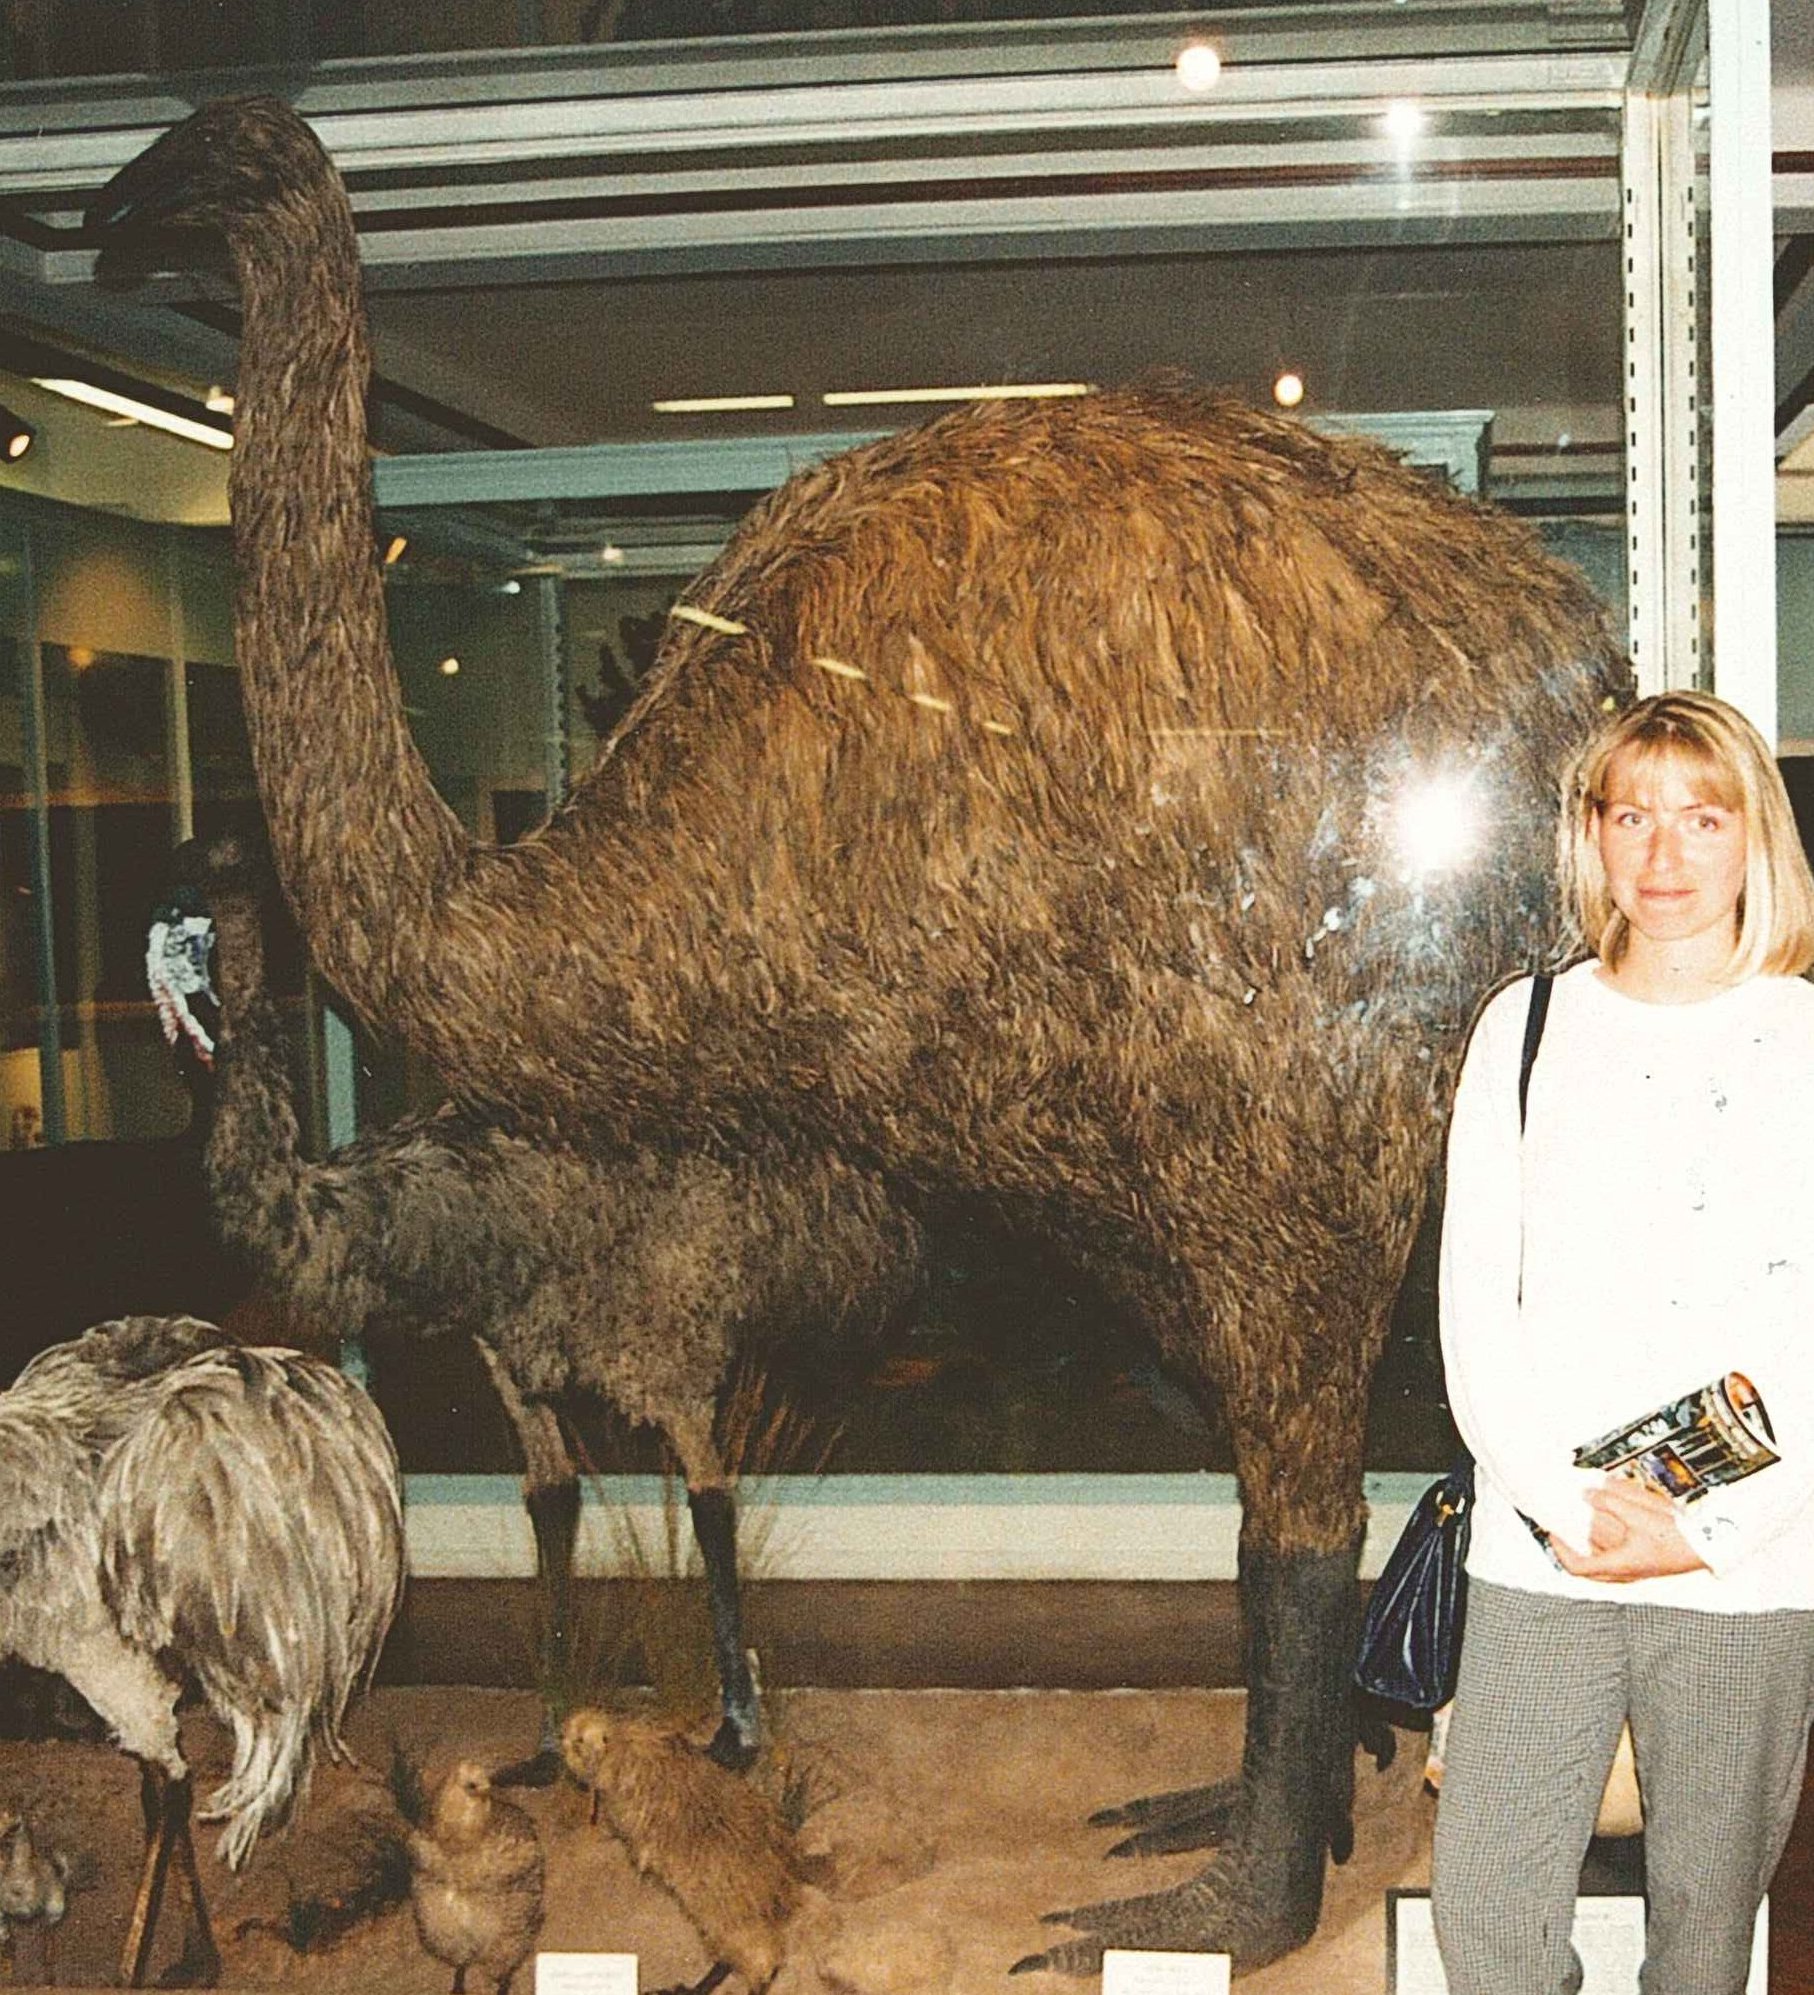 Giant ostrich photo